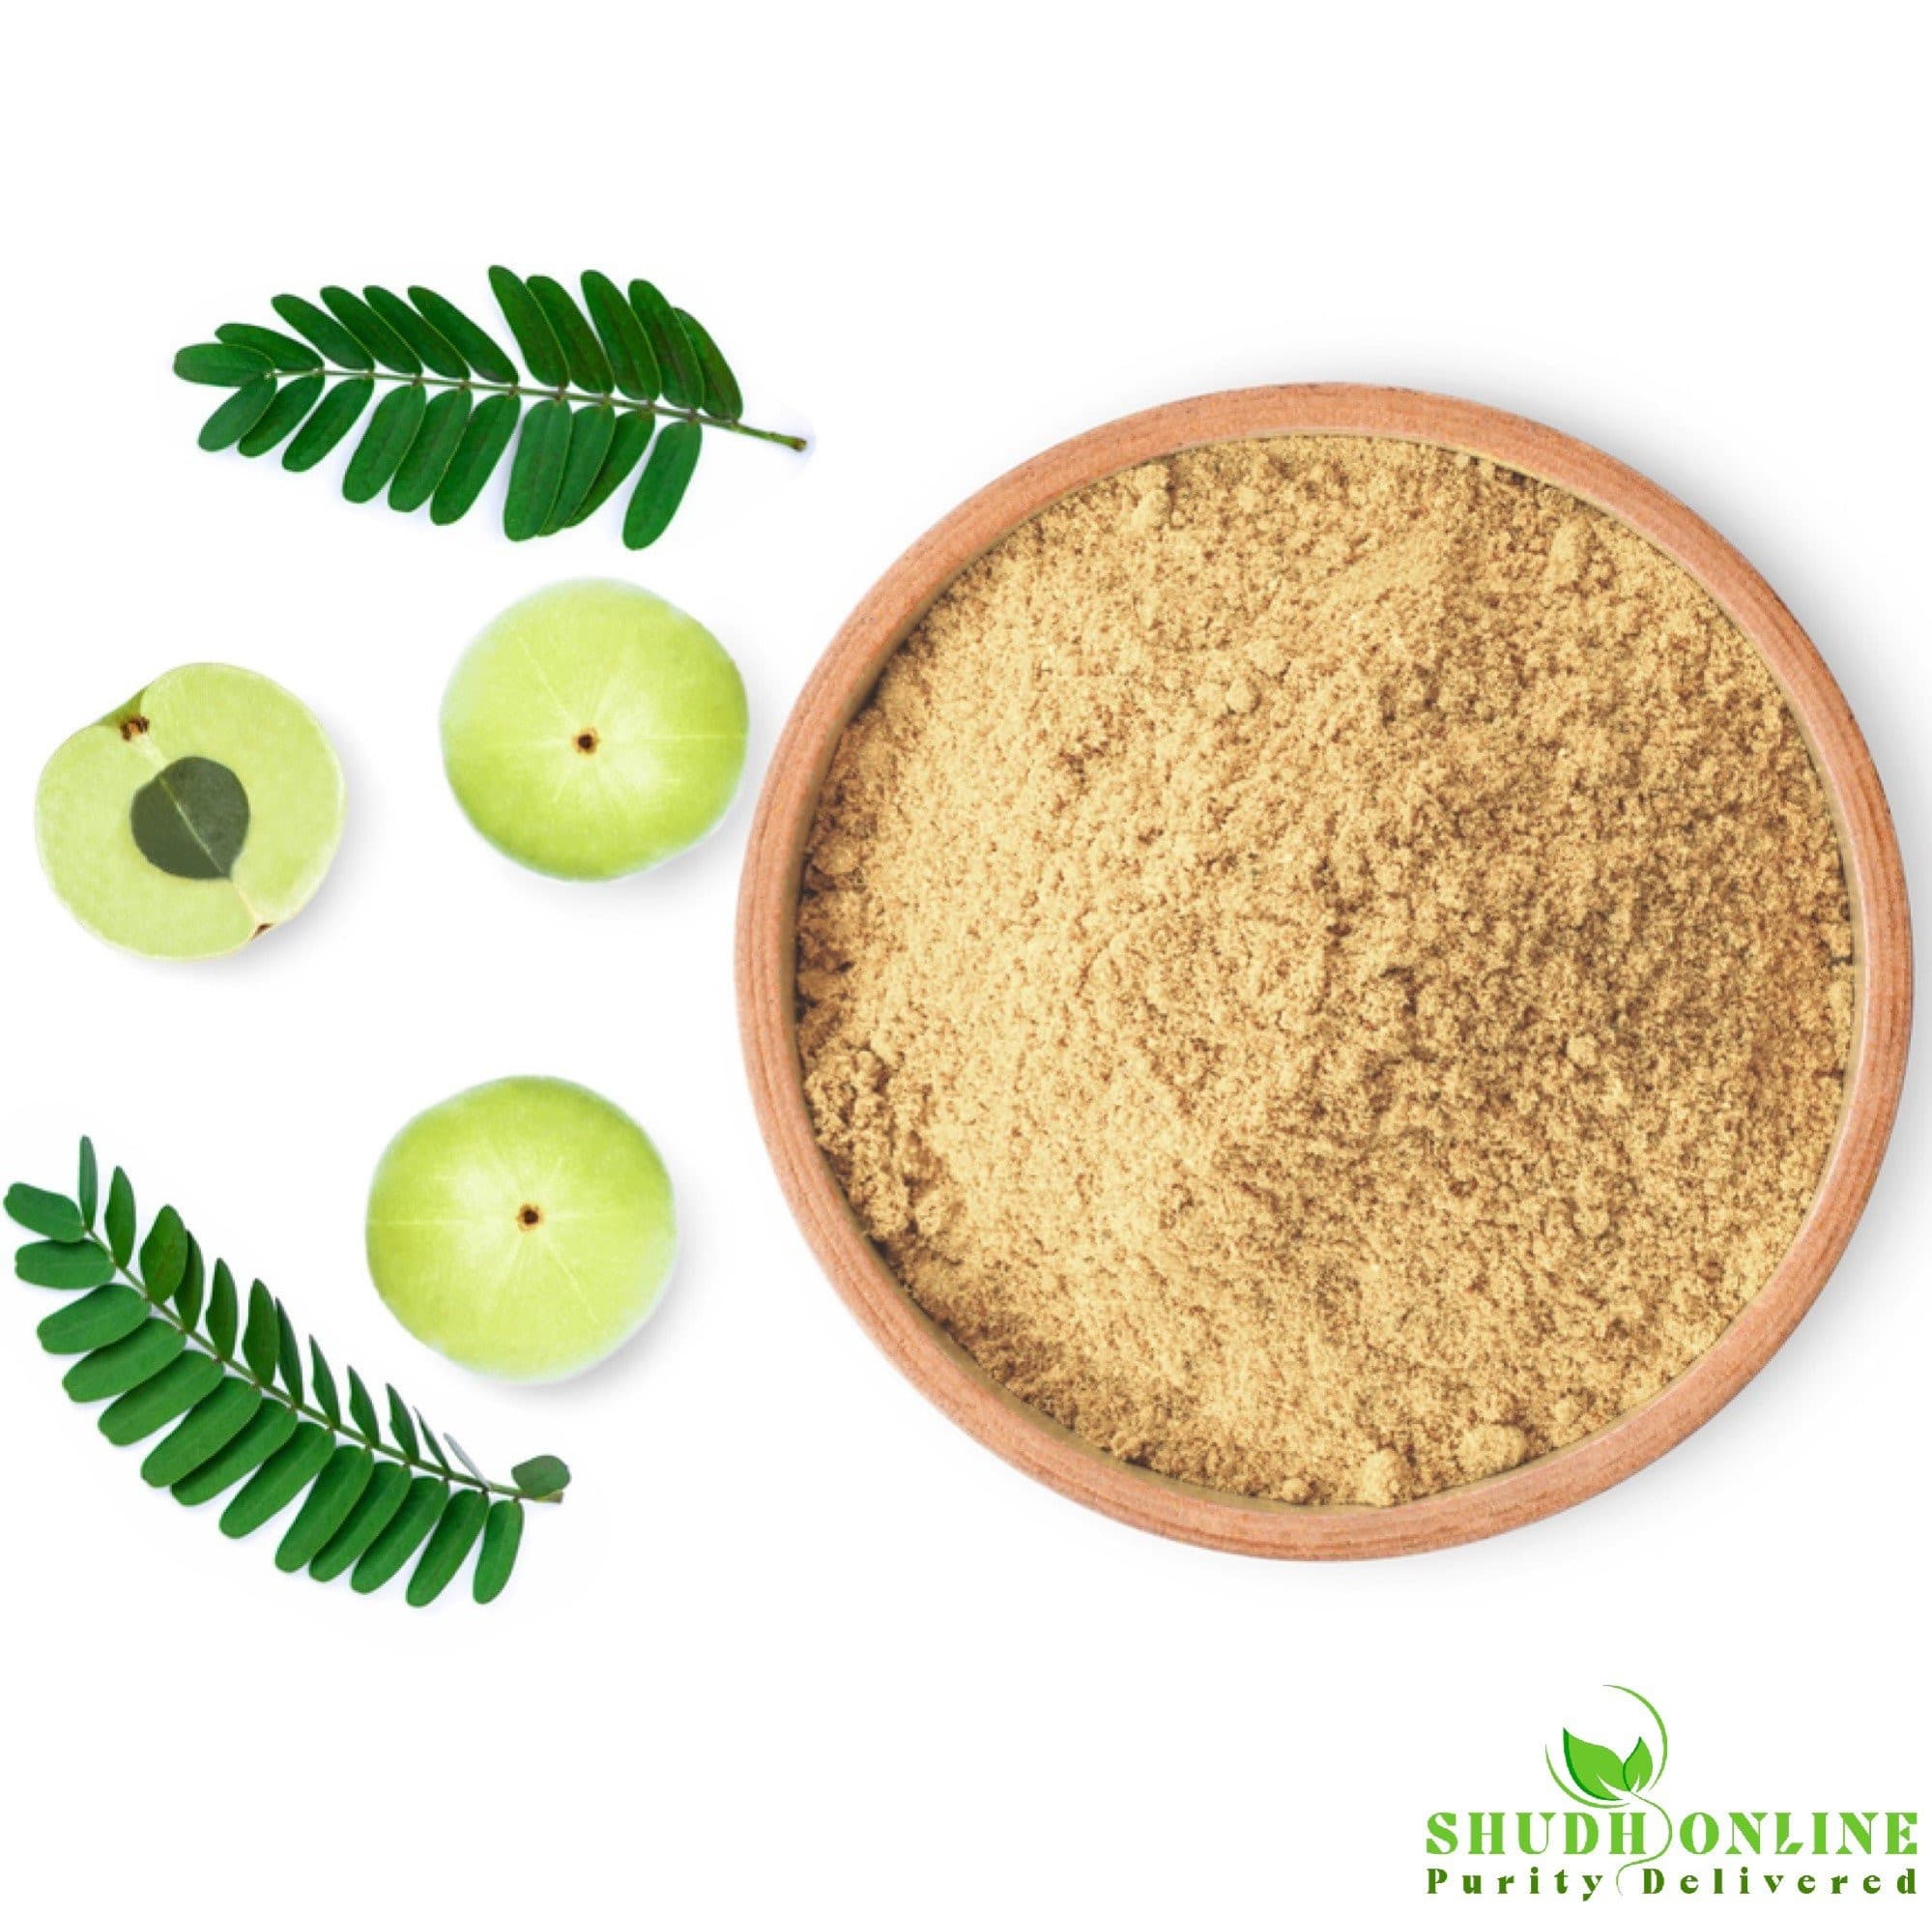 How to Use Amla Powder for Hair Growth Benefits and Recipes